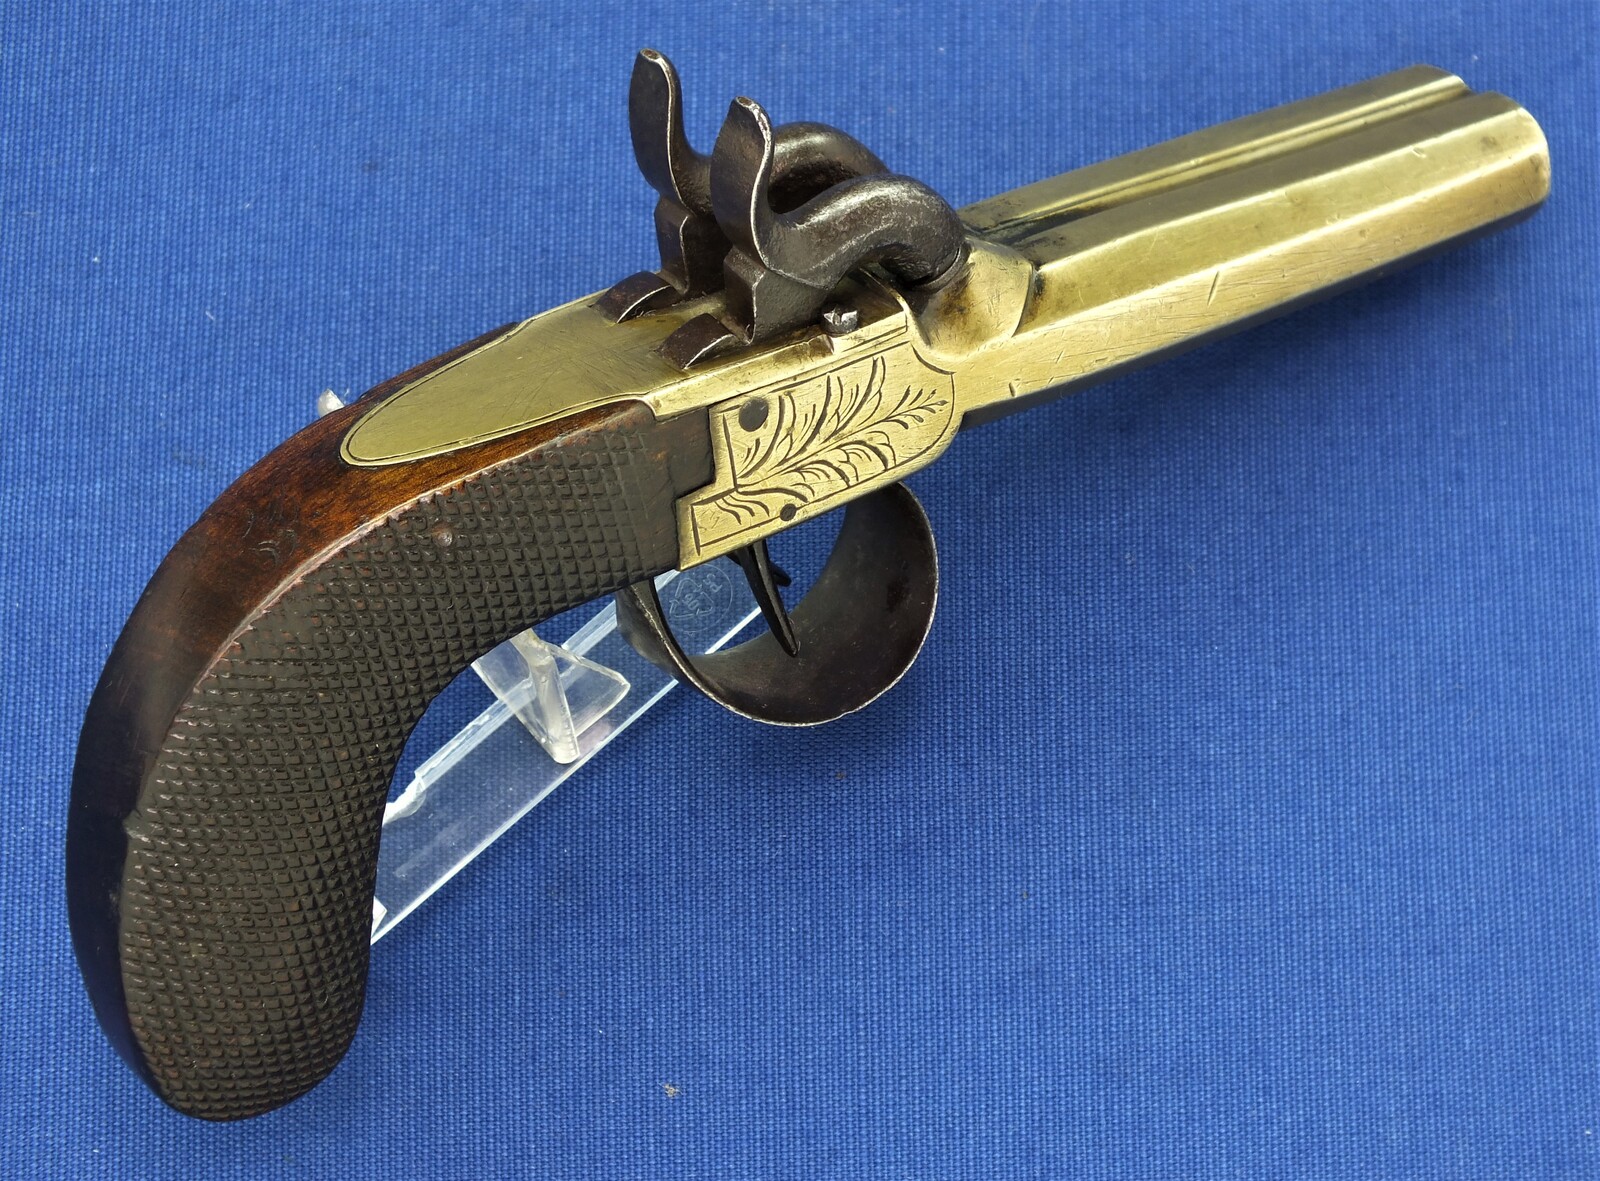 https://www.bolk-antiques.nl/galleries/a-very-nice-antique-19th-century-belgian-double-barreled-brass-percussion-pistol-caliber-11-mm-length-205-cm-in-very-good-condition-price-850-euro-7362525-en-max.JPG